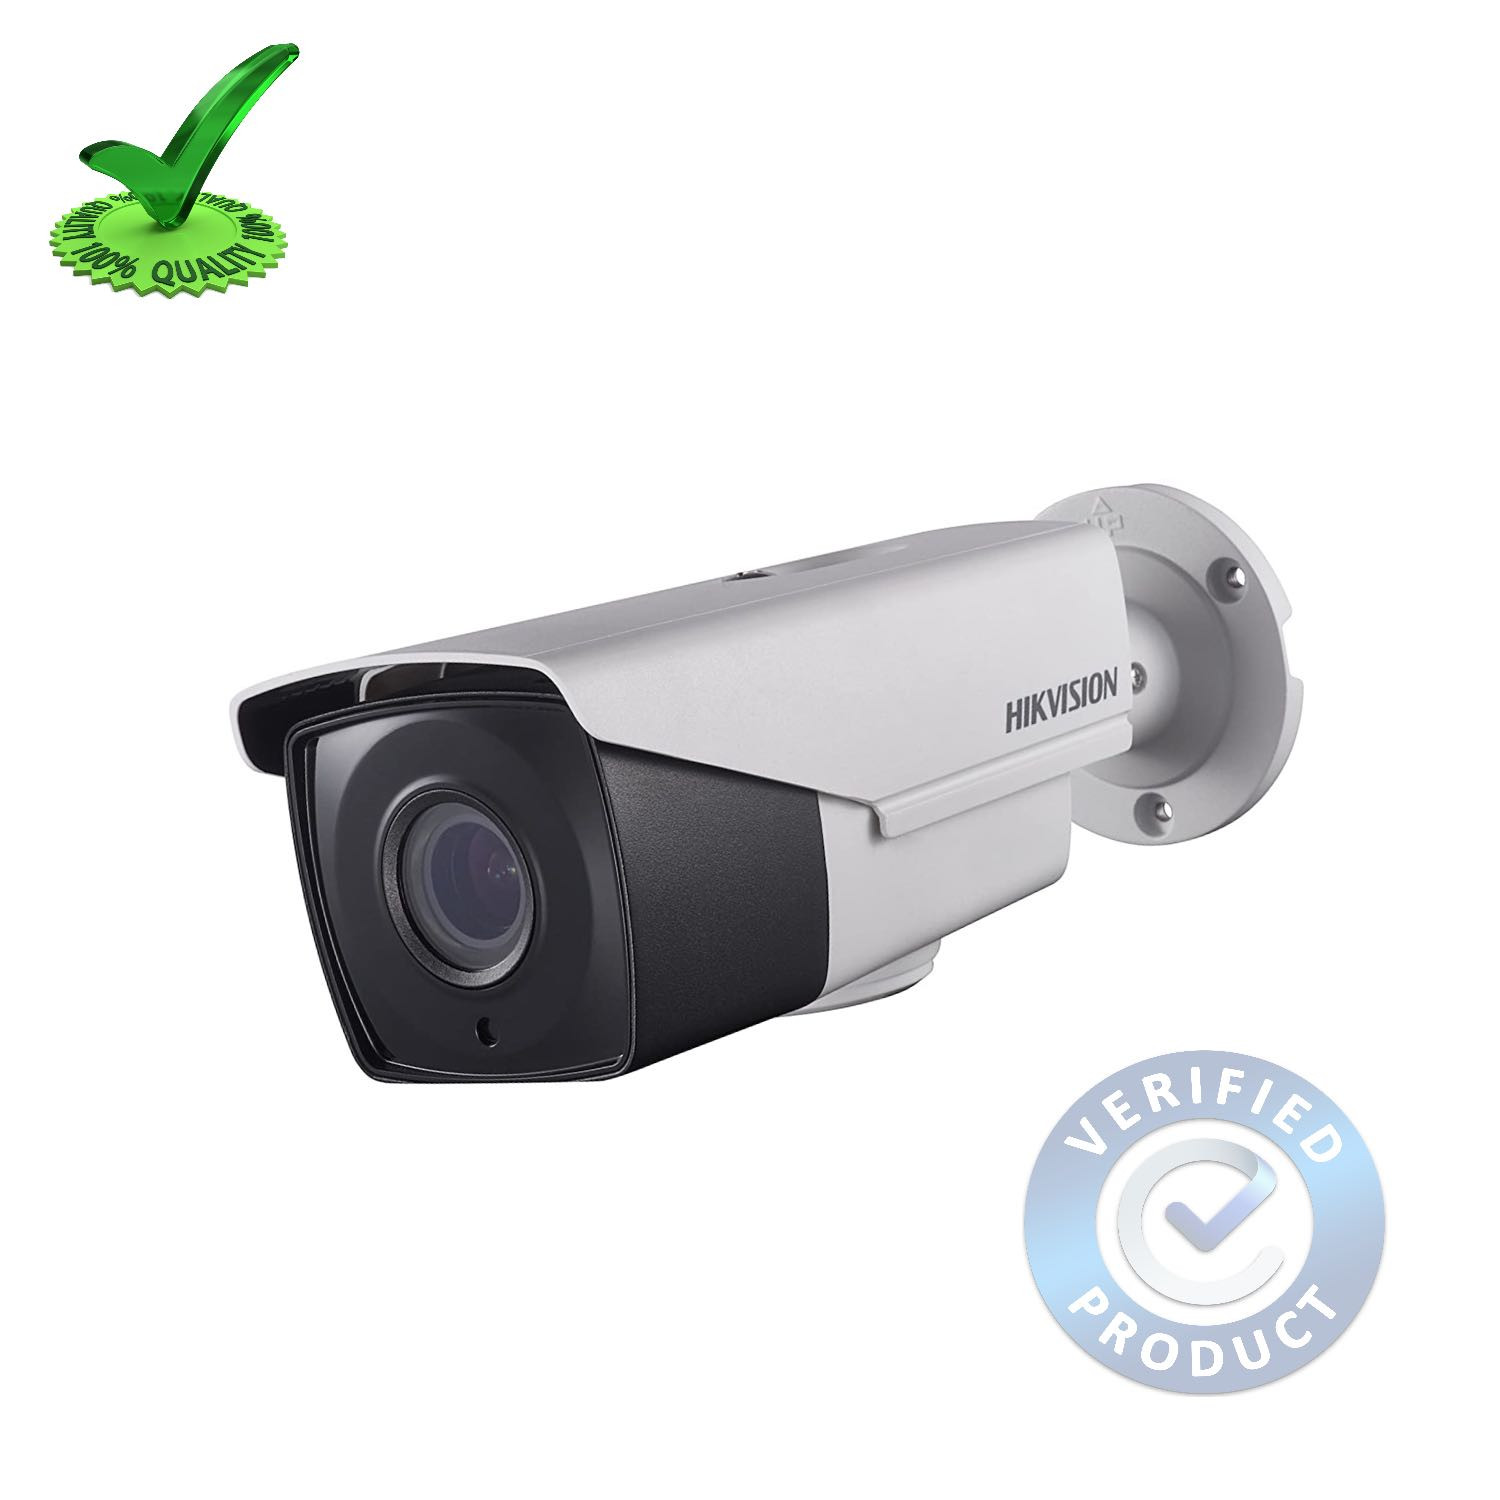 Hikvision DS-2CE1AC0T-IT1F 1MP HD Bullet Camera